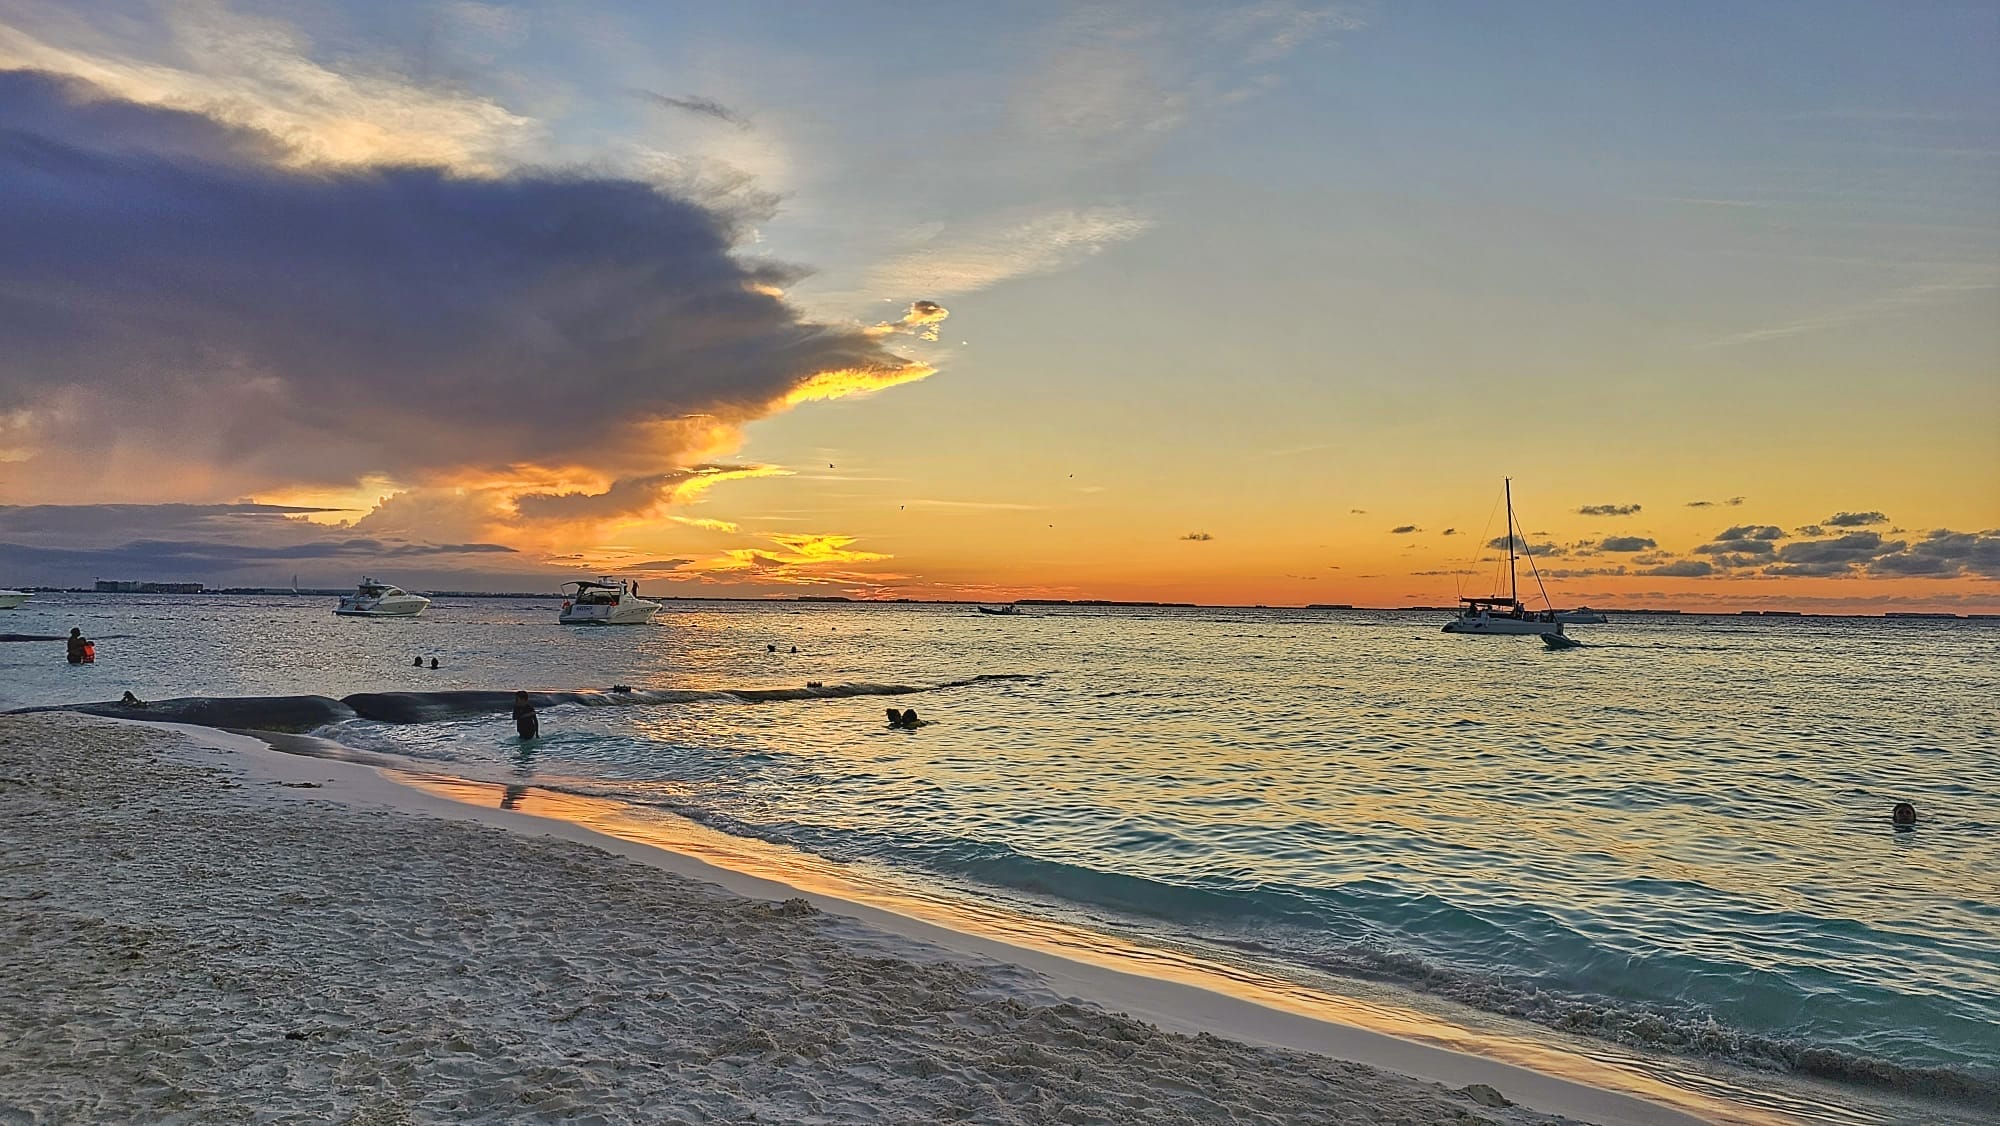 Sunset at Playa del Carmen in Riviera Maya, with boats on water and people swimming.